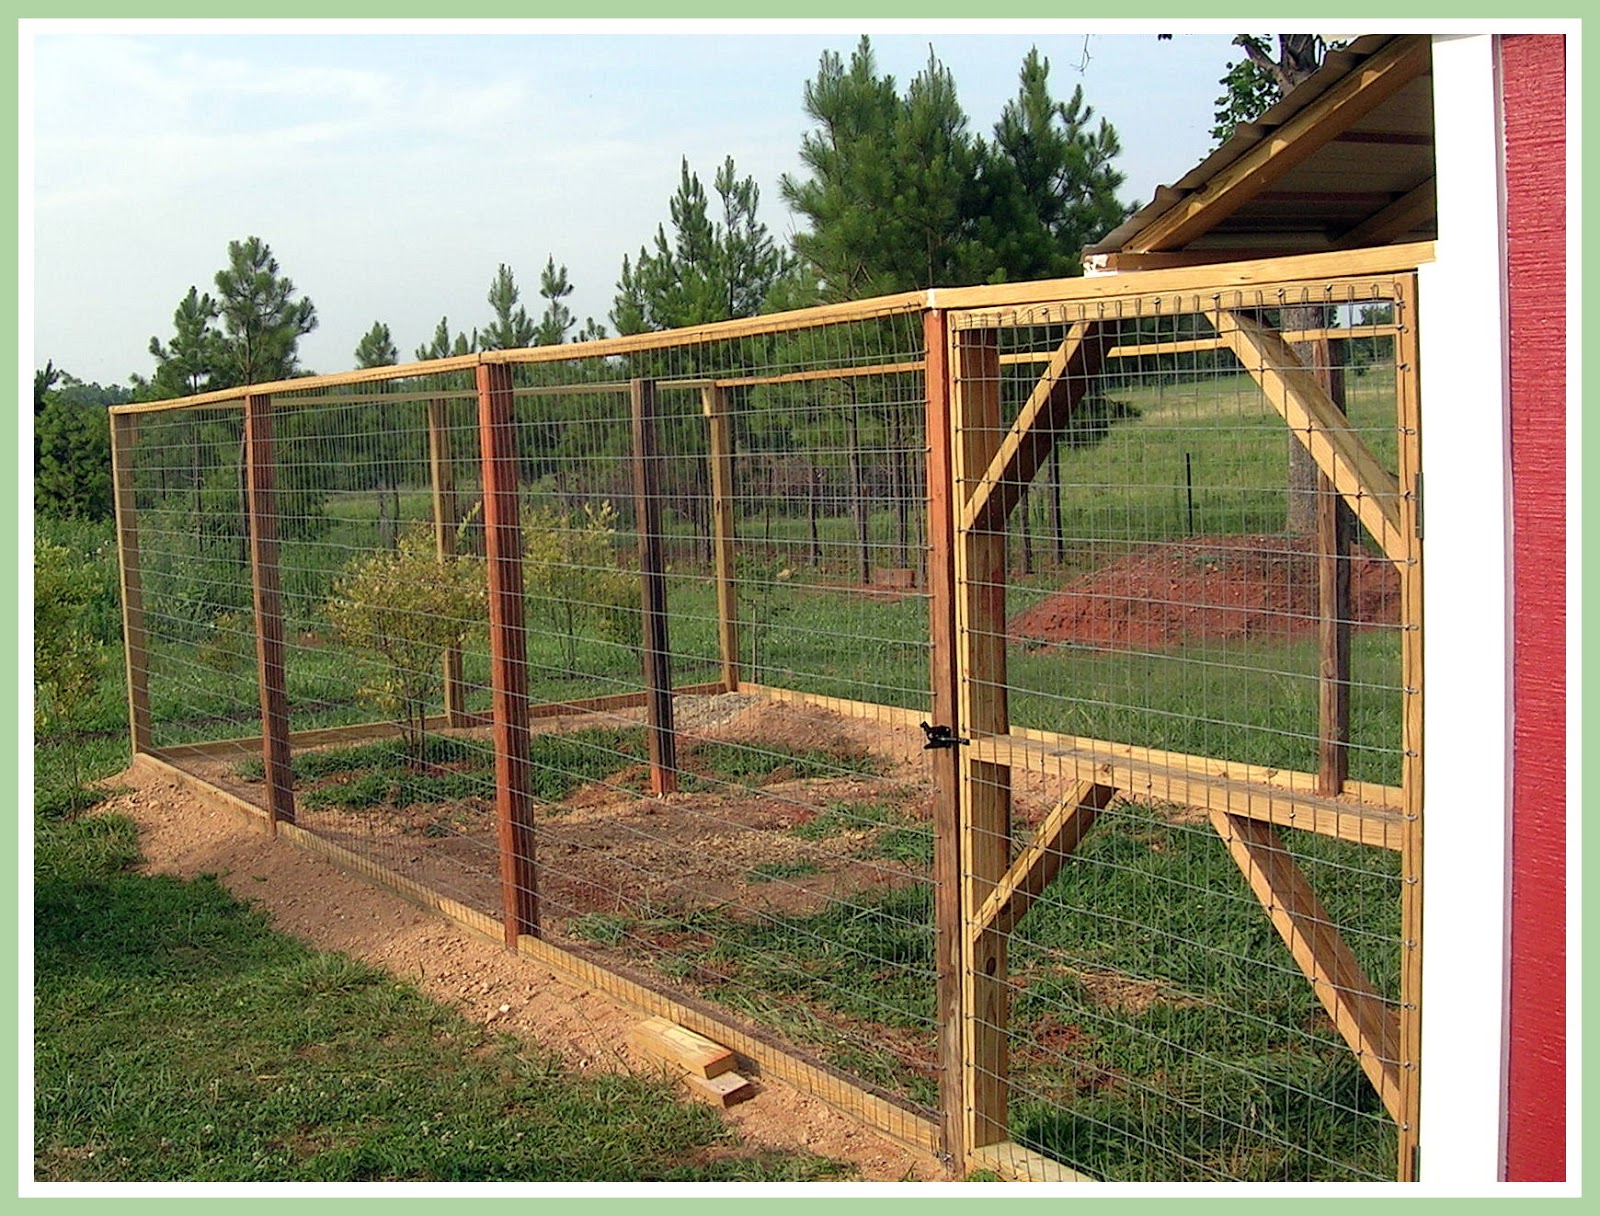 Wit's End Farm: The Chicken Yard!